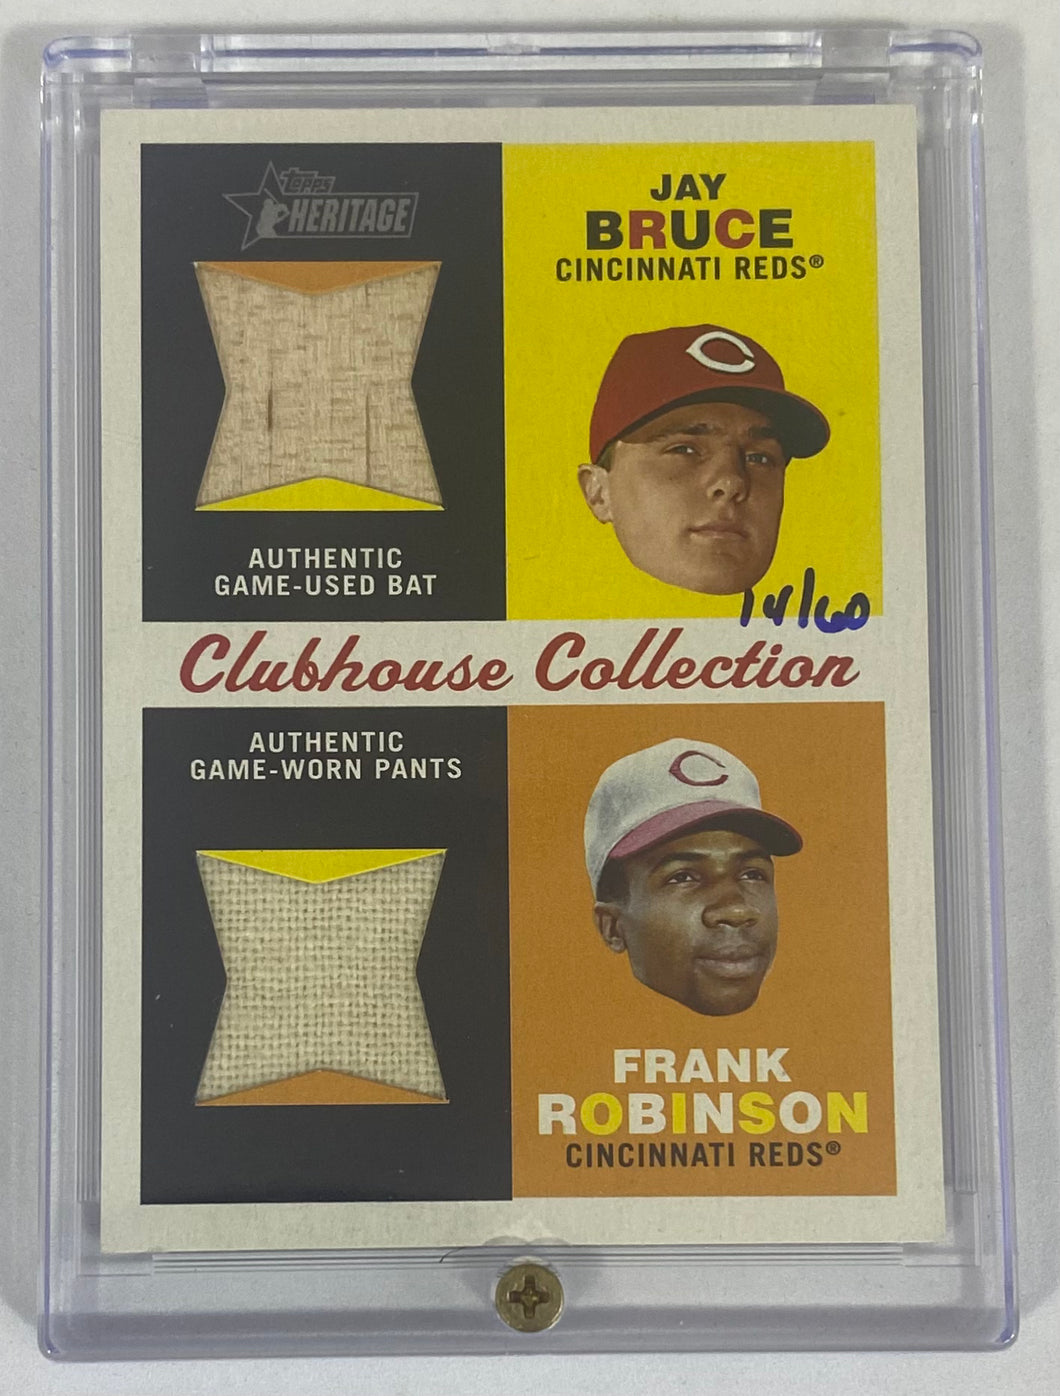 2009 Topps Heritage Duel Relics CH CCD-BR Jay Bruce and Frank Robinson 14/60